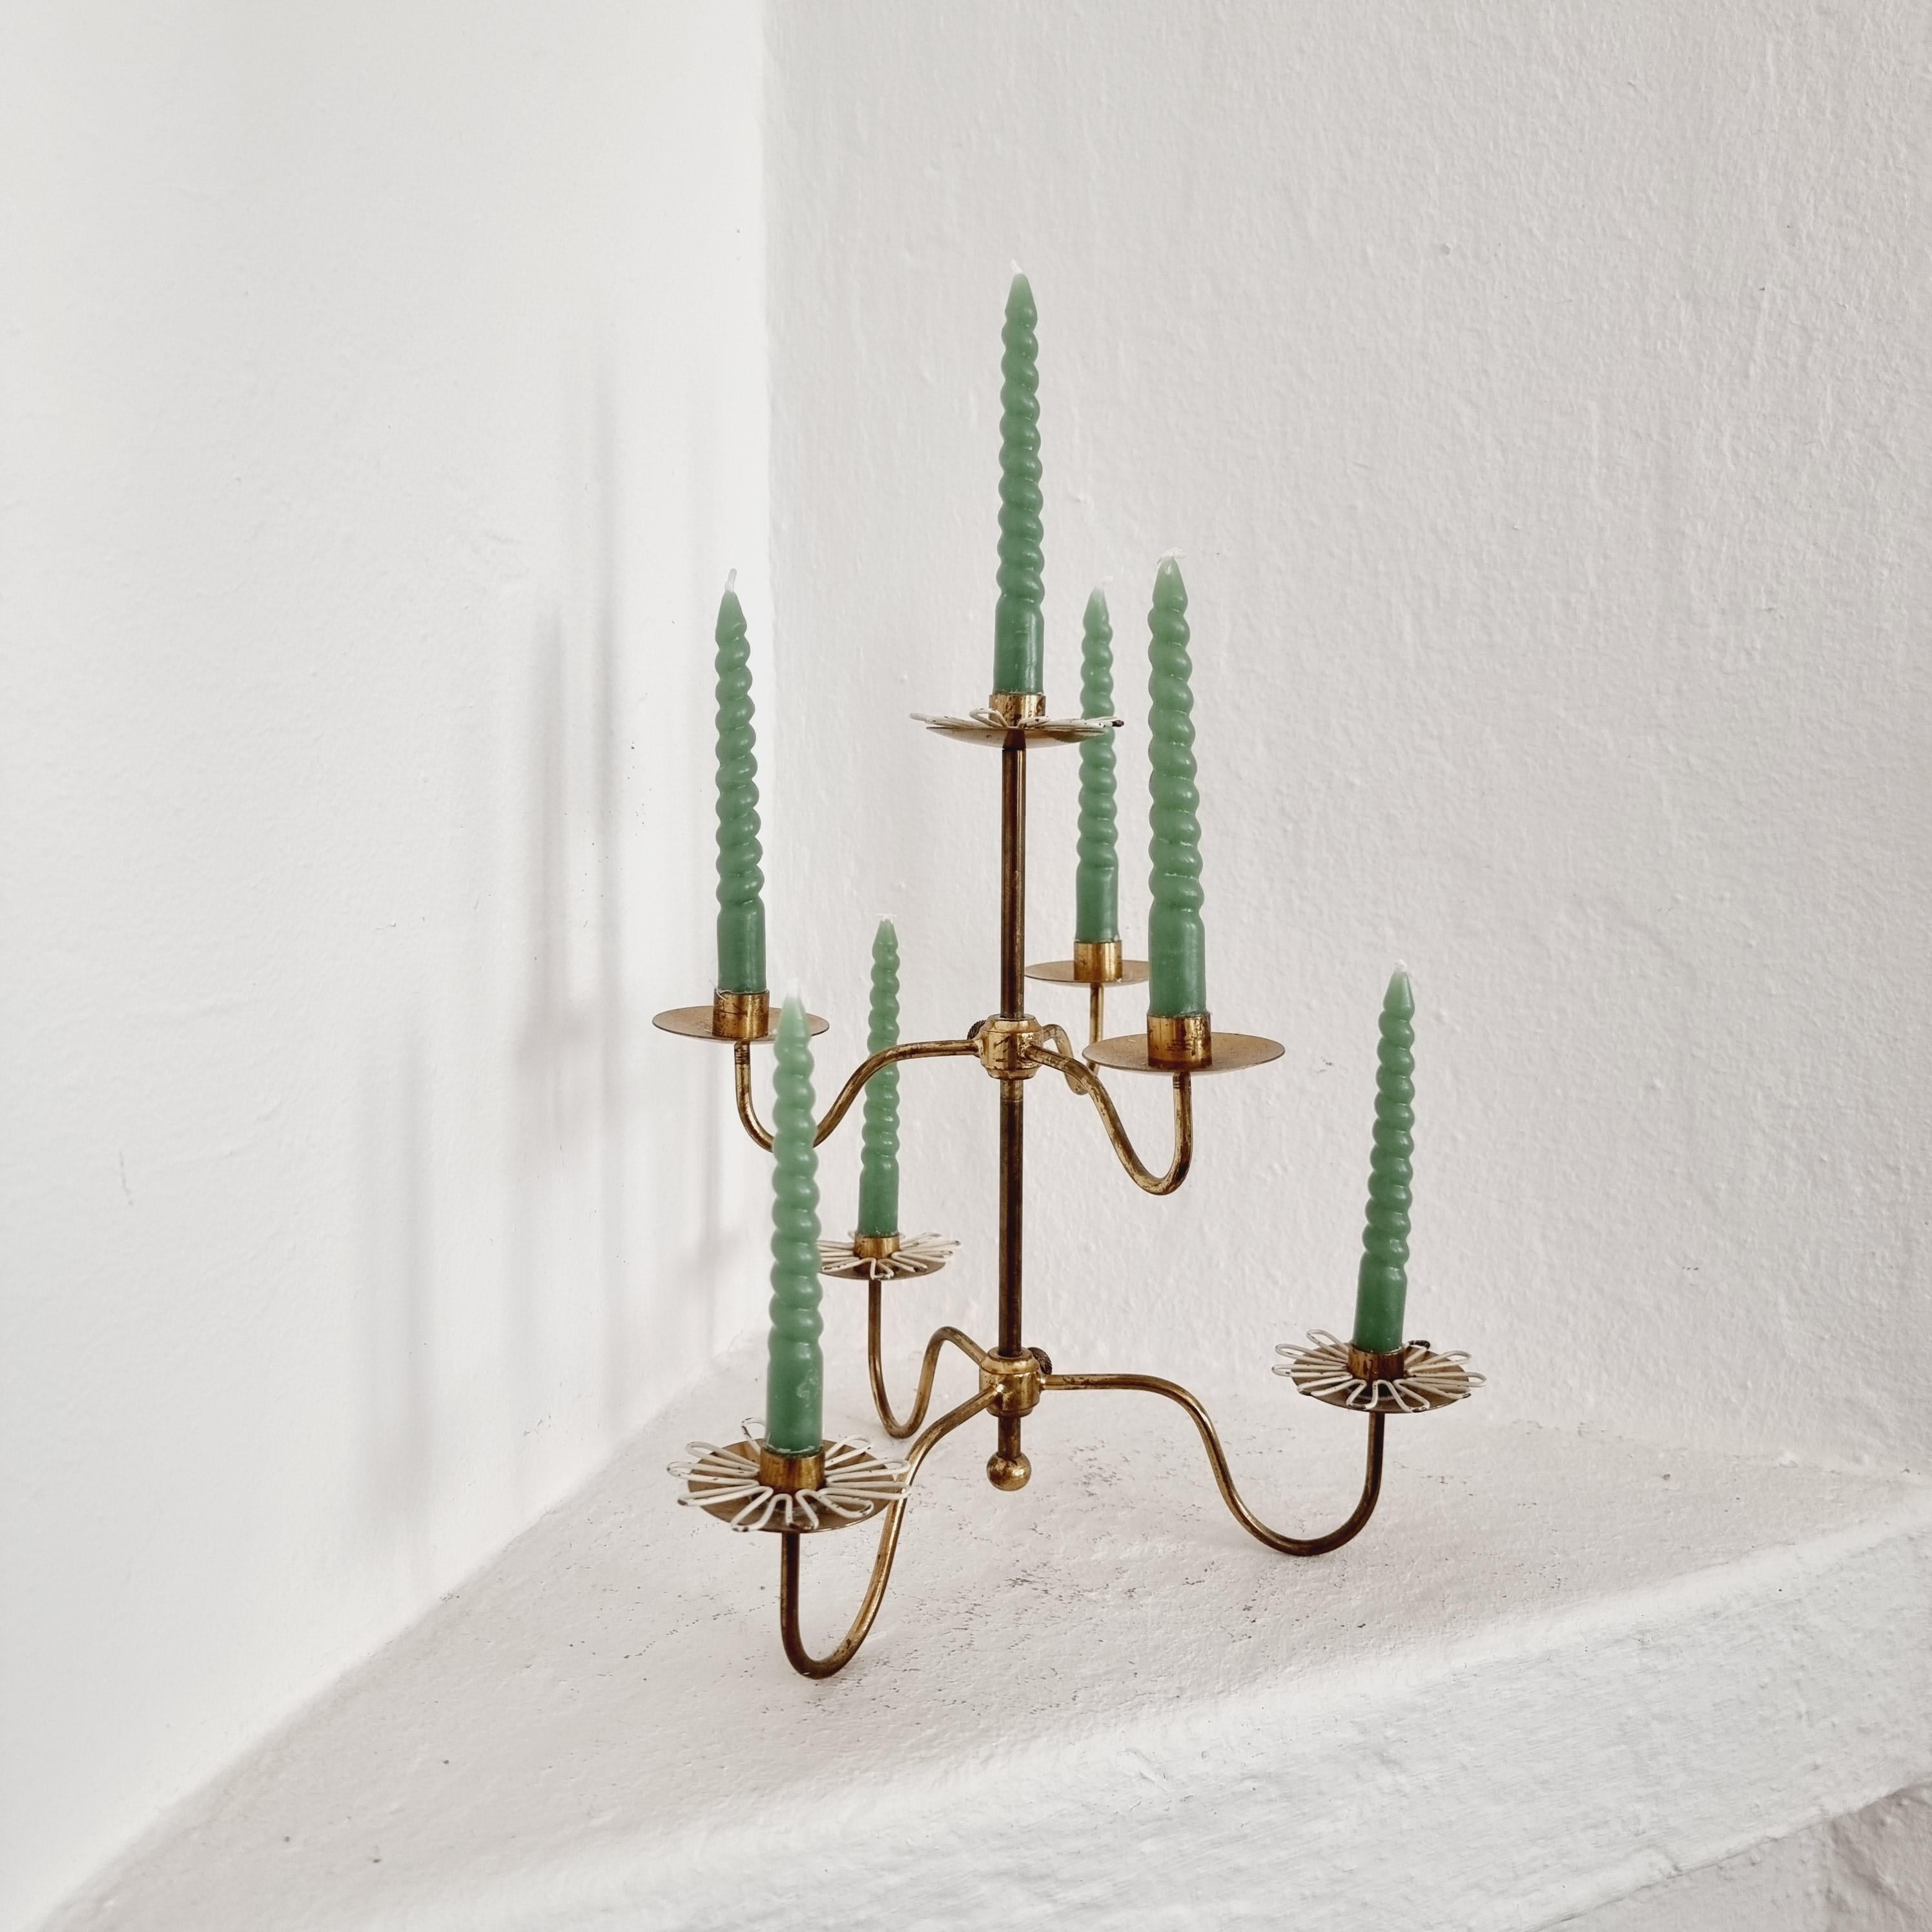 Candelabra / Candleholder in solid brass wit five rare candlerings in white colored metal. Attributed to Josef Frank for Firma Svenskt Tenn, mid-1900s / Swedish Modern.

Adjustable height. In good conditions, nice patina. Candlerings with signs of